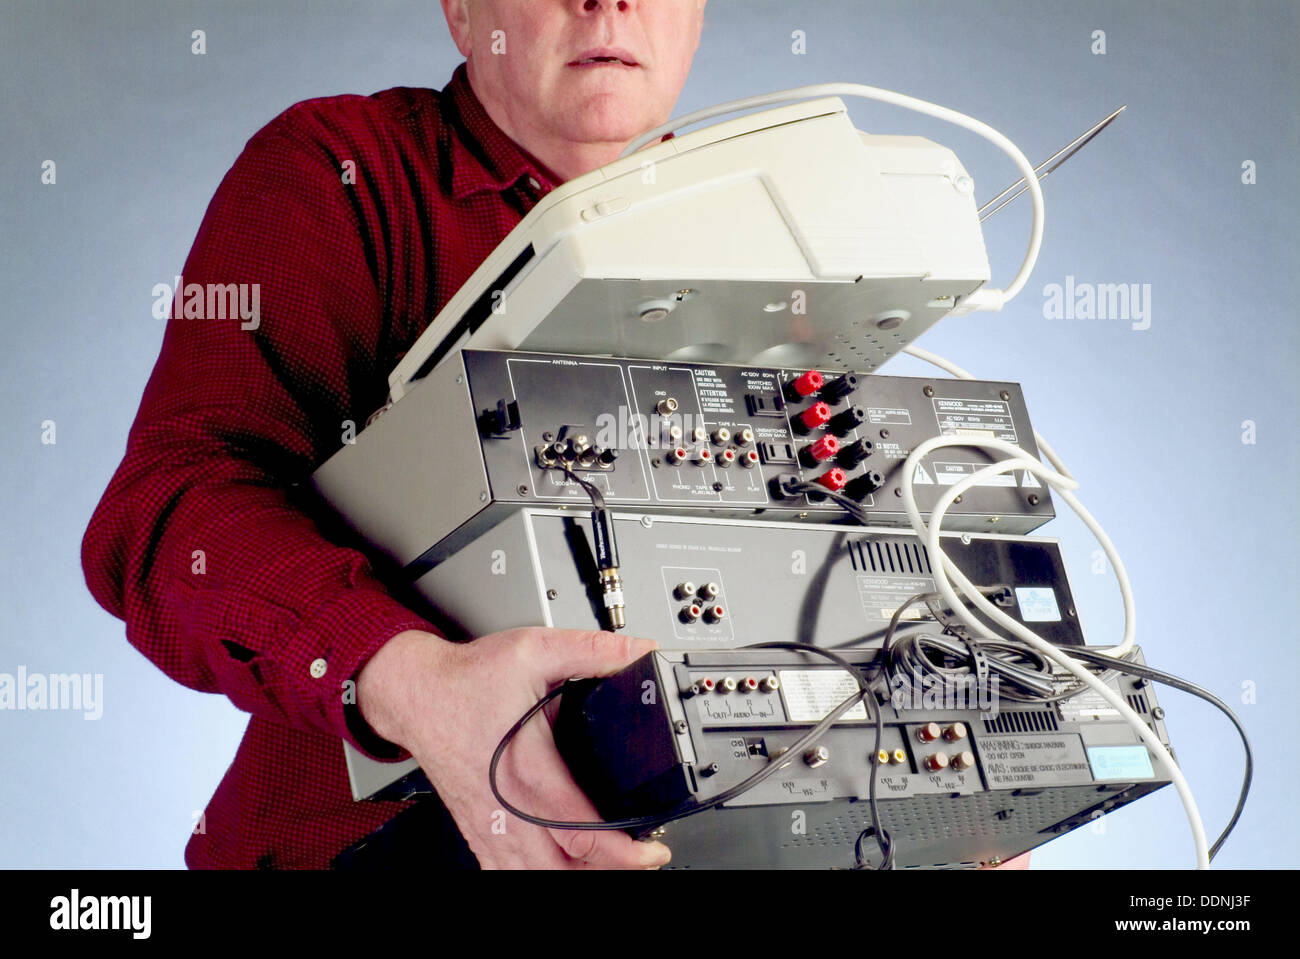 person-carrying-stereo-equipment-and-fax-machine-DDNJ3F.jpg